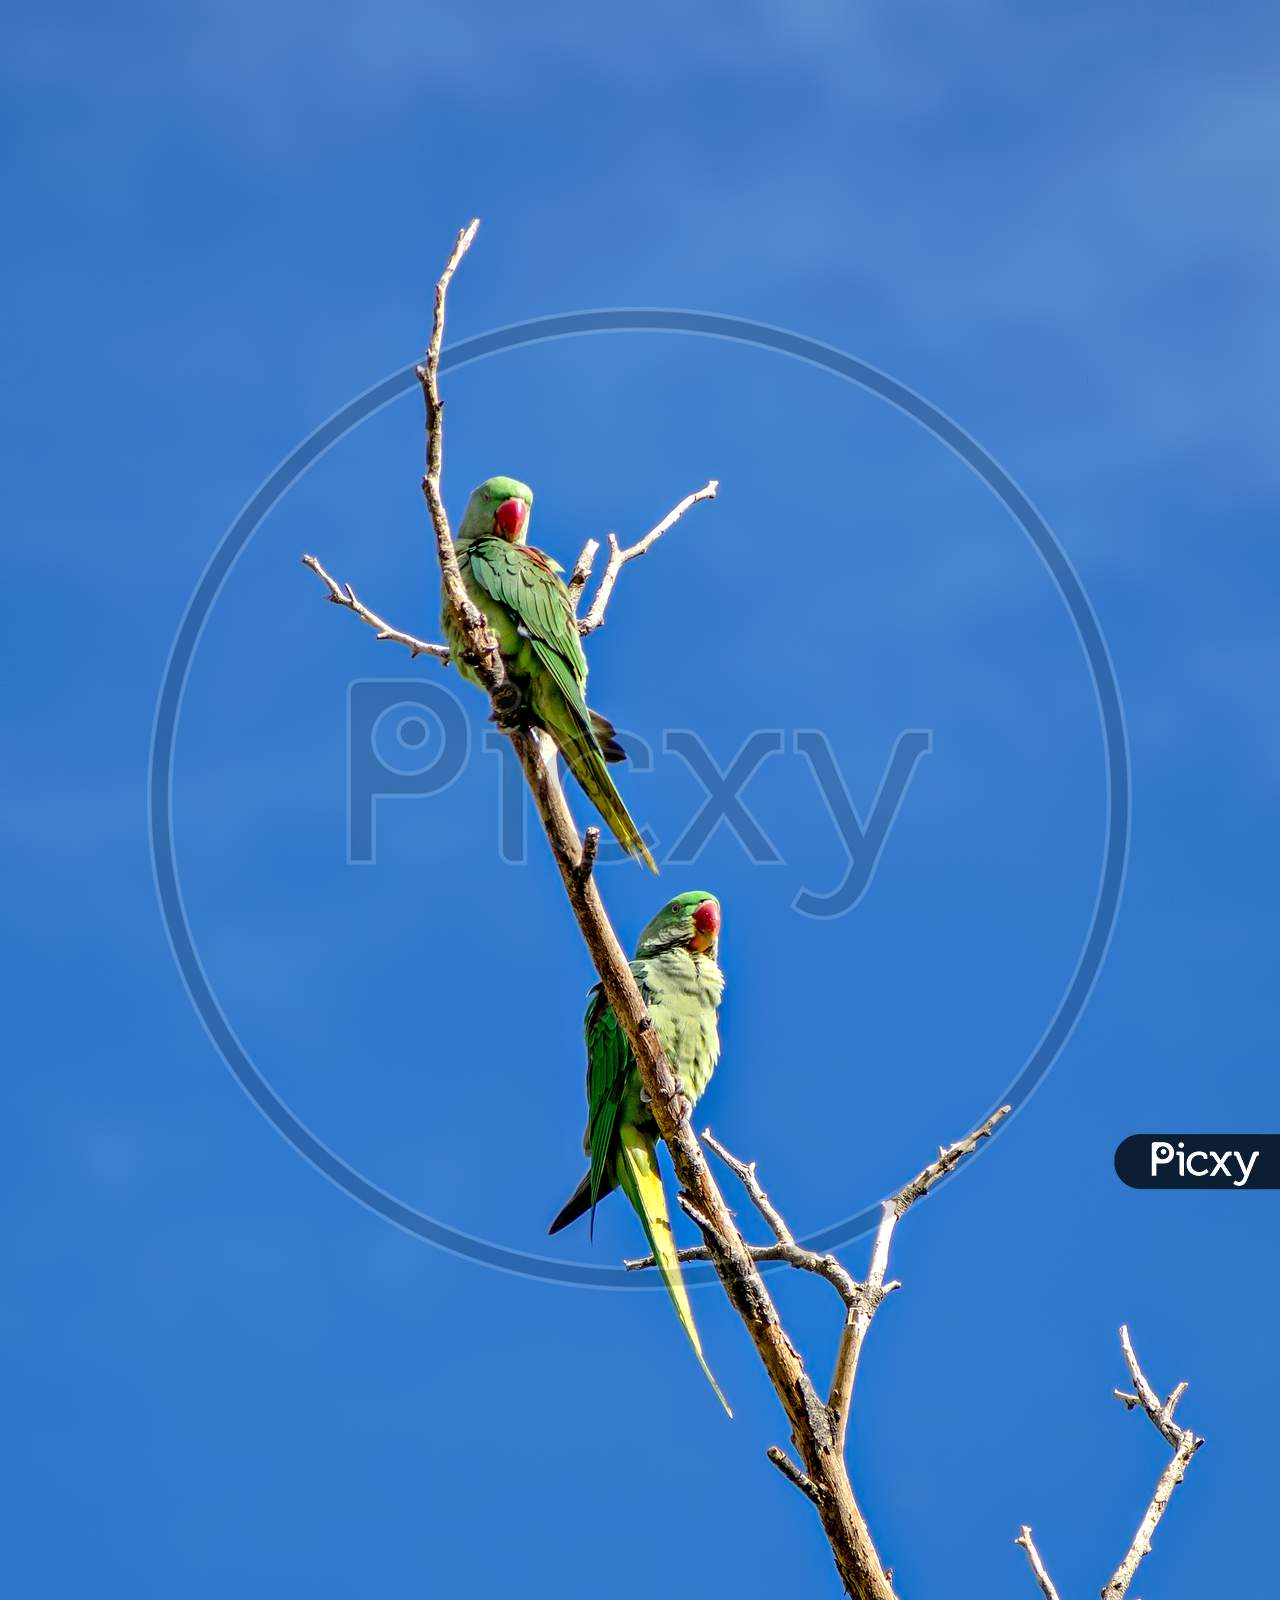 Two Indian Ring-Necked Parrot Sitting On Dry Tree Branch.